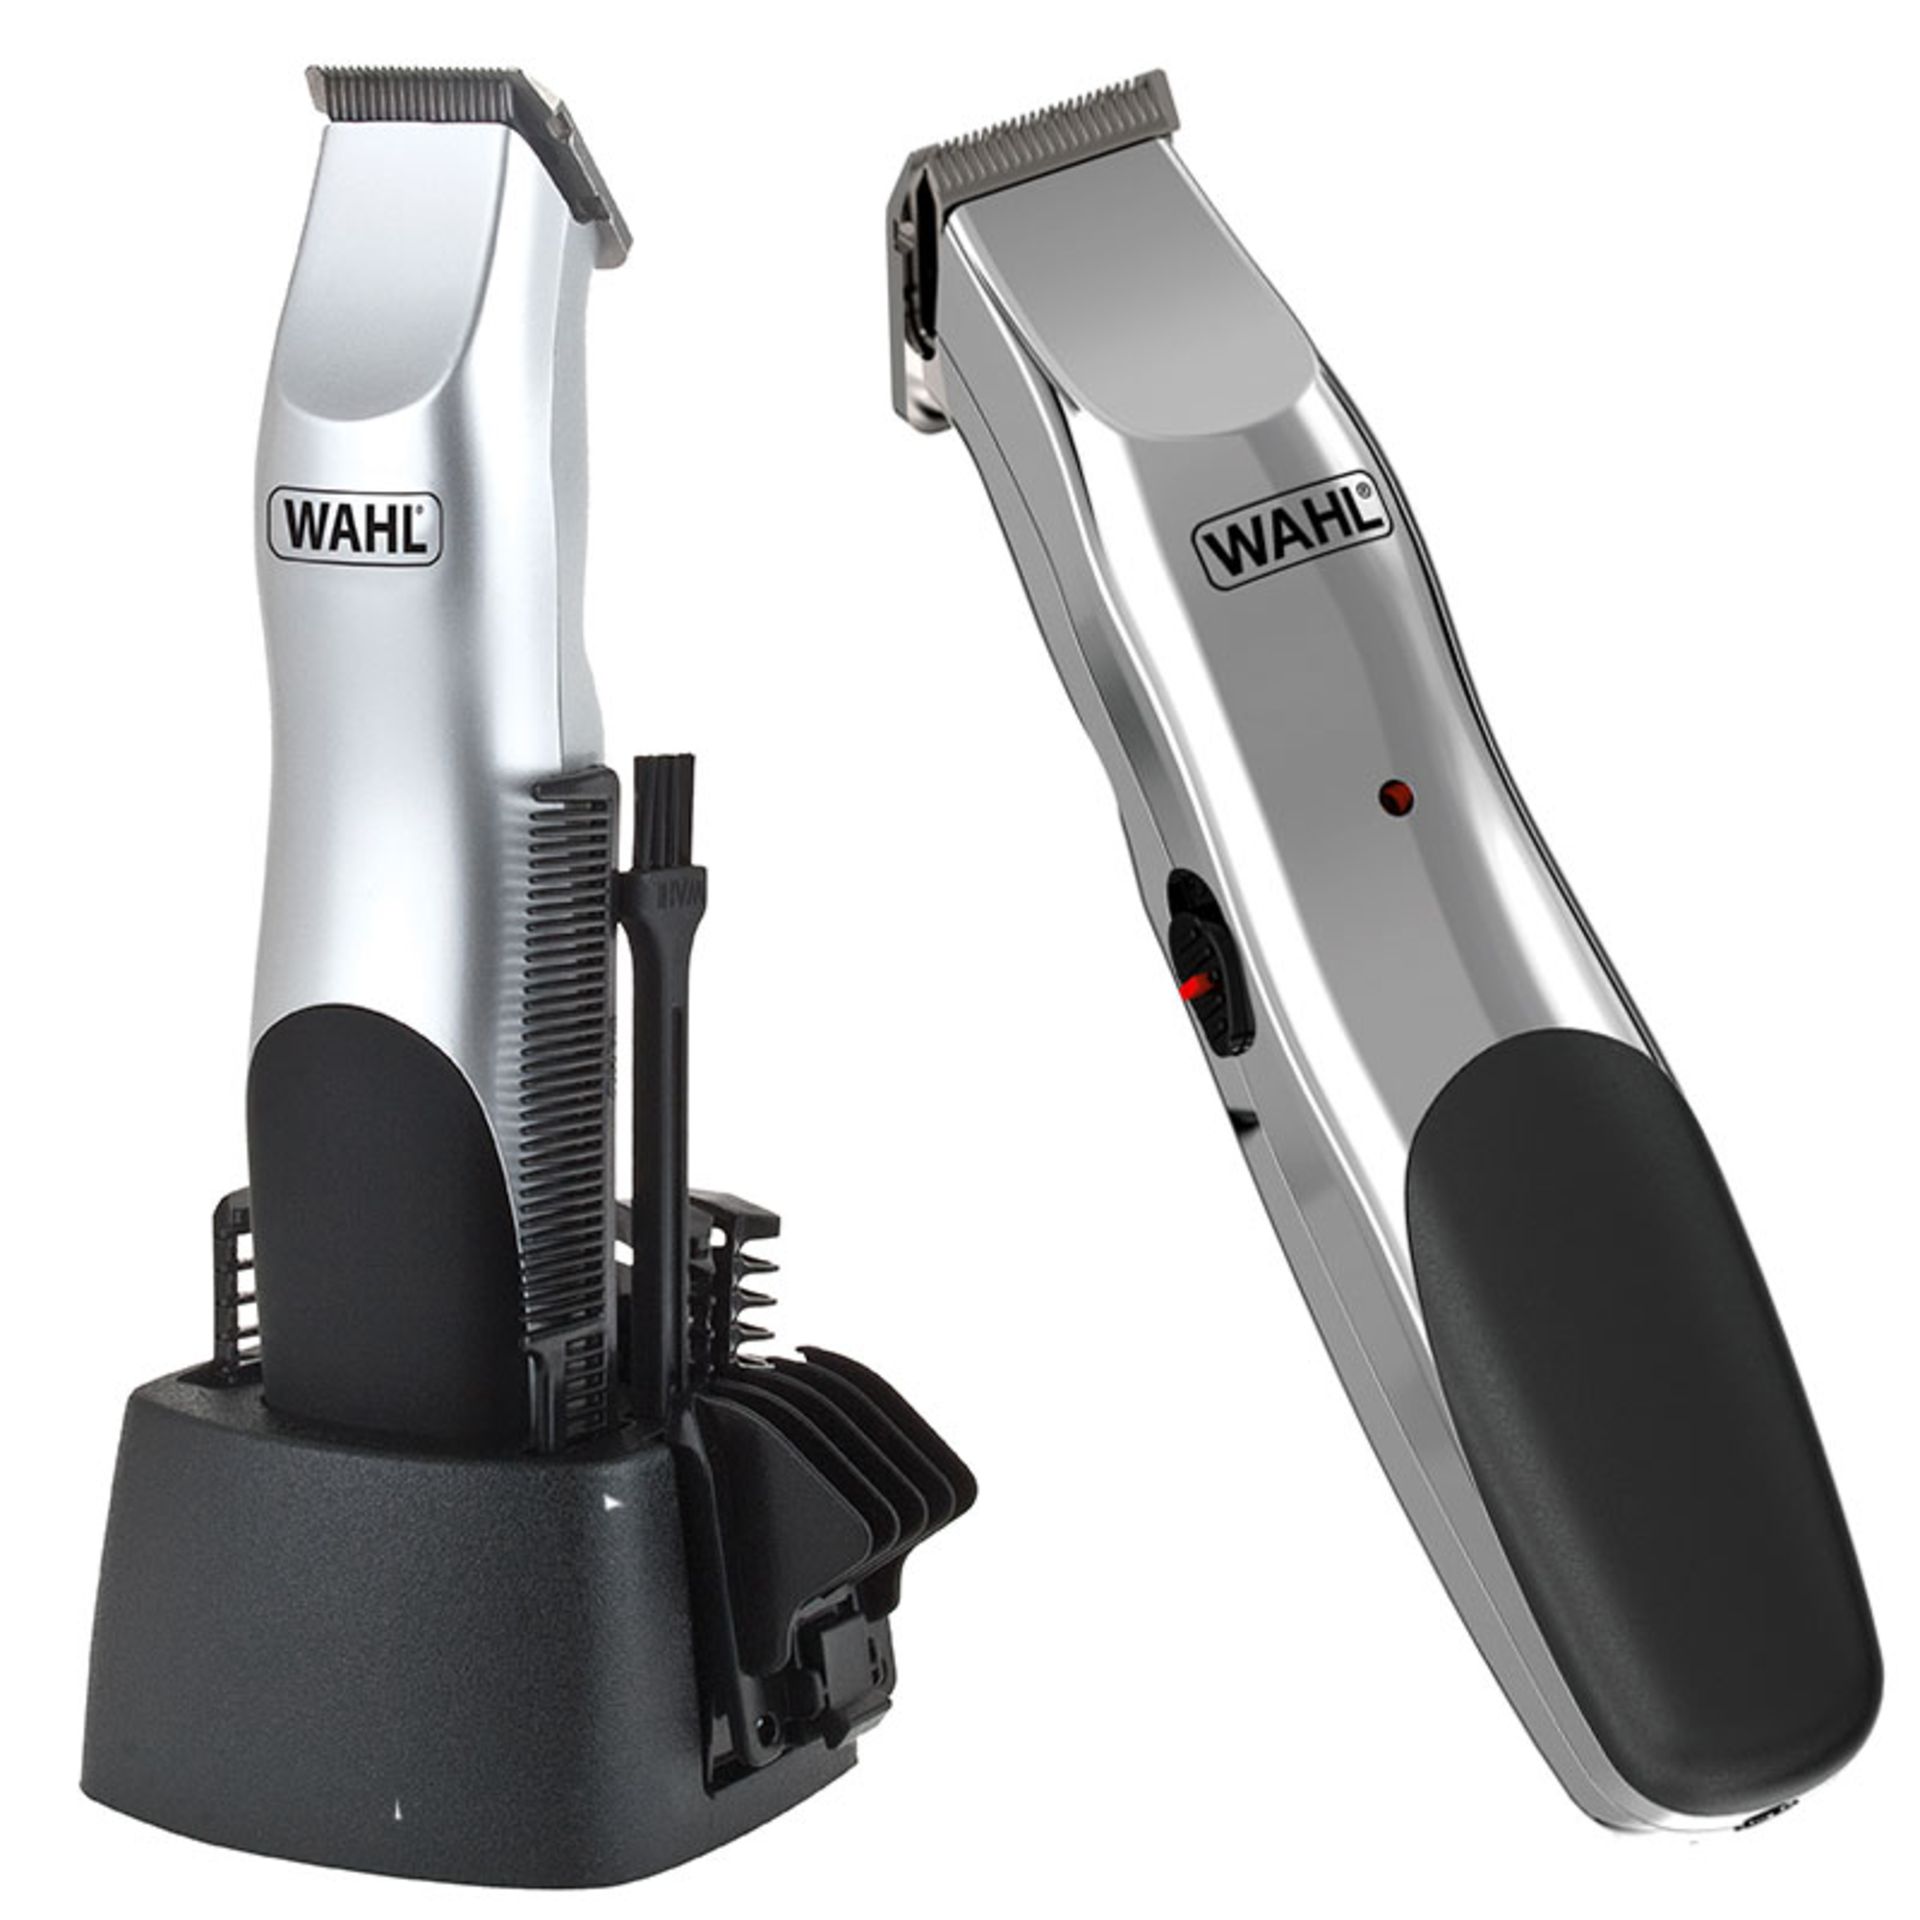 Wahl Groomsman Stubble And Beard Trimmer - Image 2 of 2